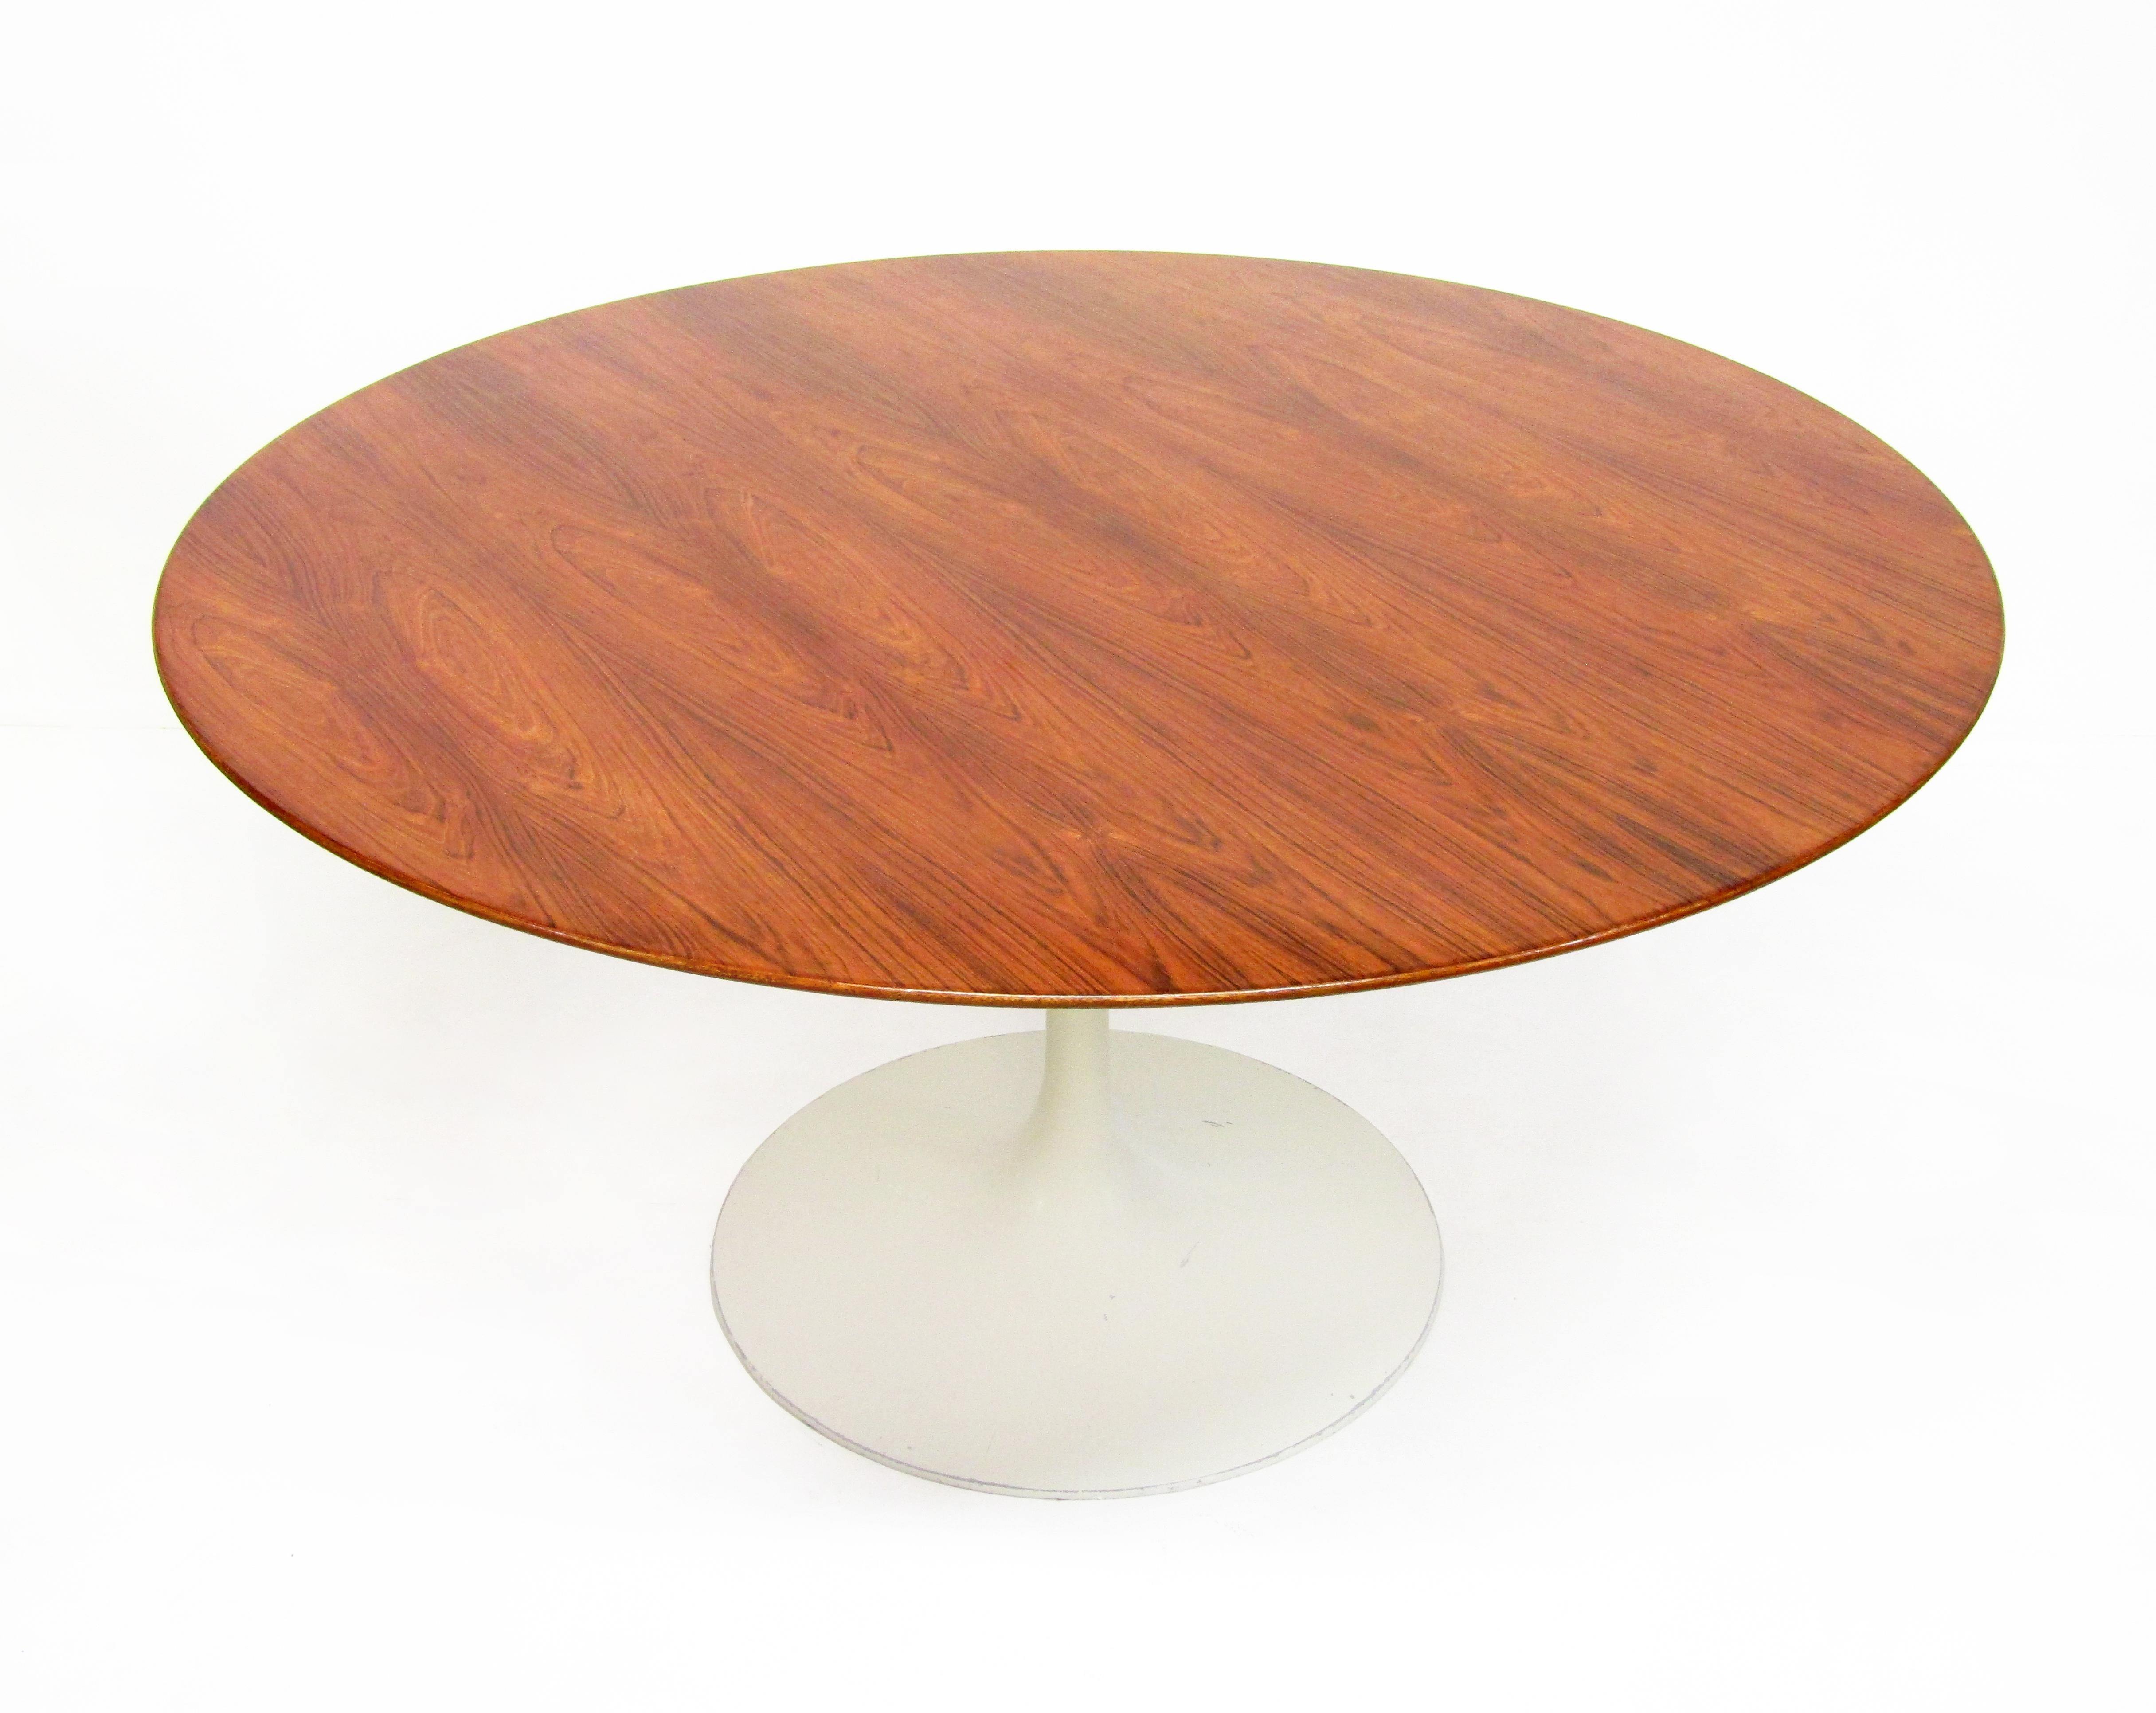 1970s Rosewood Tulip Dining Table & Six Chairs Set By Eero Saarinen for Knoll For Sale 5